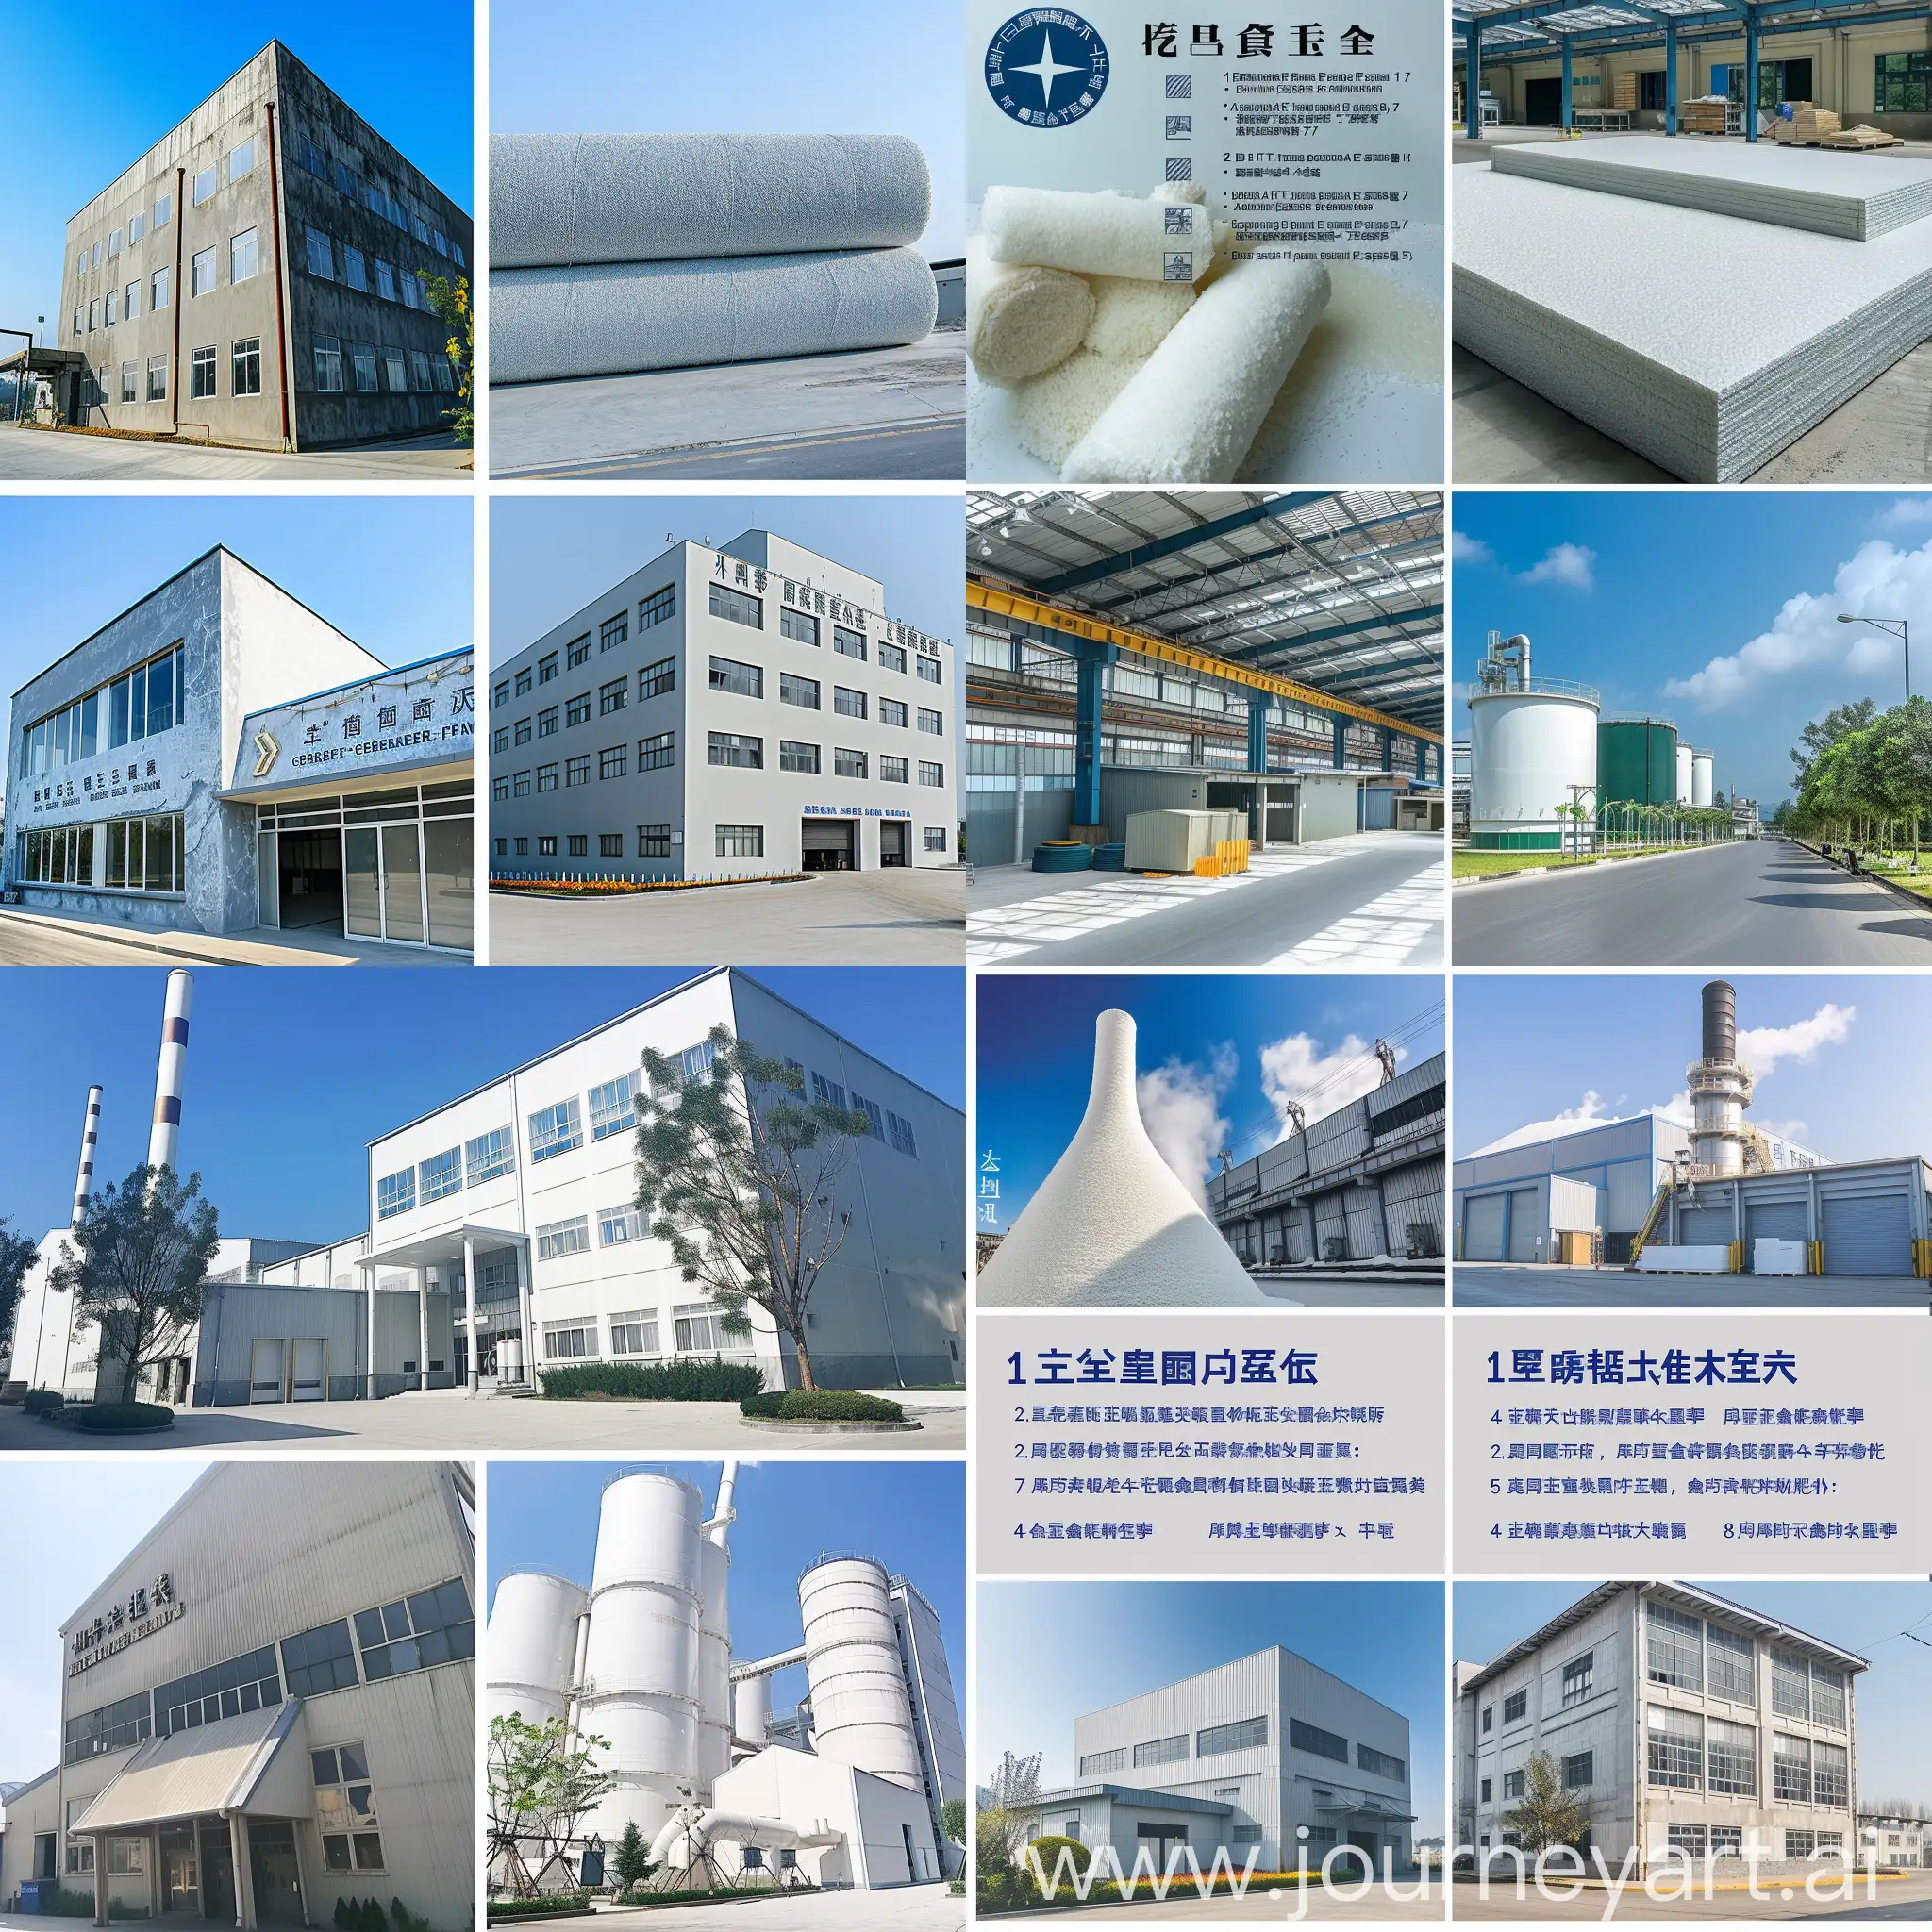 line card for refractory and insulation products company. Main products: 1.ceramic fiber series: ceramic fiber bulk,ceramic fiber blanket,ceramic fiber board,ceramic fiber paper,ceramic fiber module,ceramic fiber vacuum formed shapes,ceramic fiber textiles;
2. Bio soluble Fiber series:bio soluble fiber paper, bio soluble fiber blanket, bio soluble fiber board.
3.Alumina HT fiber series:Alumina HT fiber bulk, Alumina HT fiber blanket,Alumina HT fiber board,poly-crystal veneering module.
4. calcium silicate board&shapes
5.micro-porous board
6.aerogel blanket
7.refractory and insulatinf bricks
8.monothlics and castables
line card structure:
top: company logo,
middle: products name and pictures,
bottom: refractory and insulation manufacturer's plant